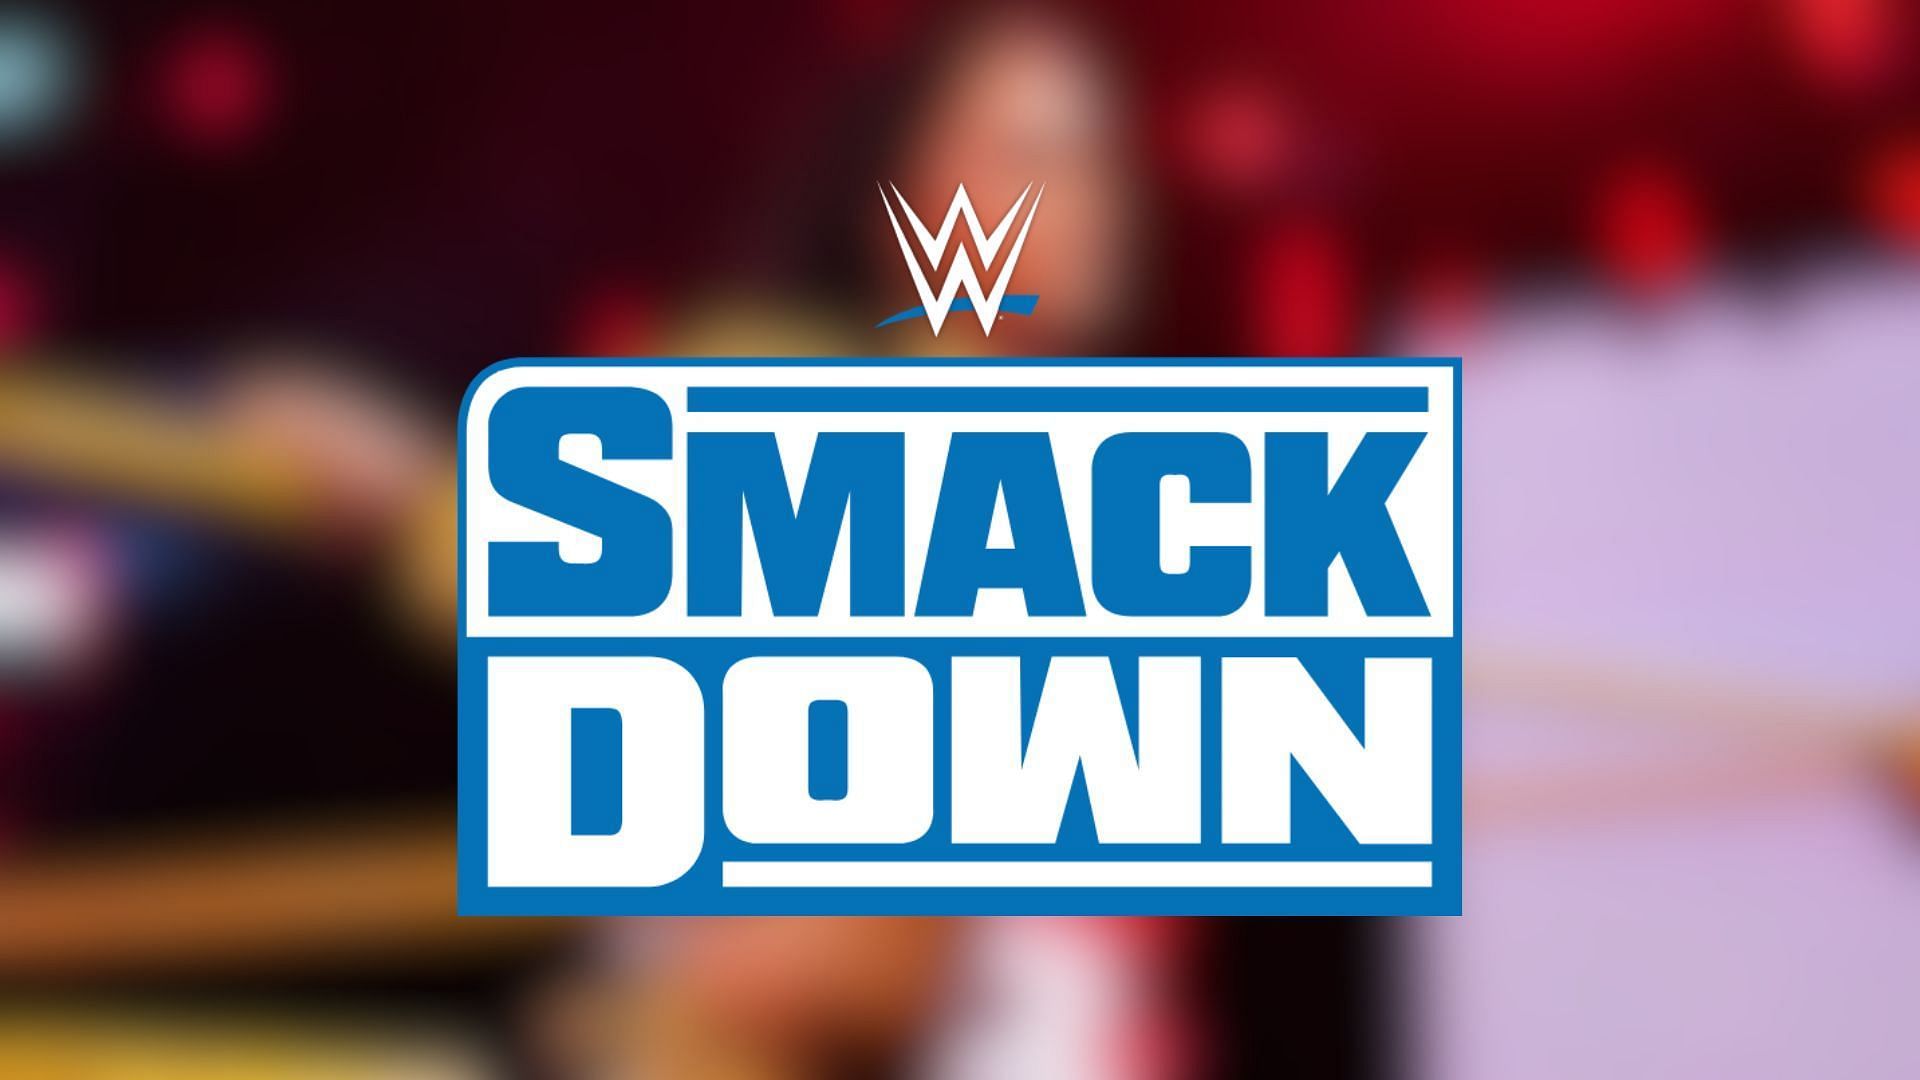 This SmackDown star has been absent since September 2022...